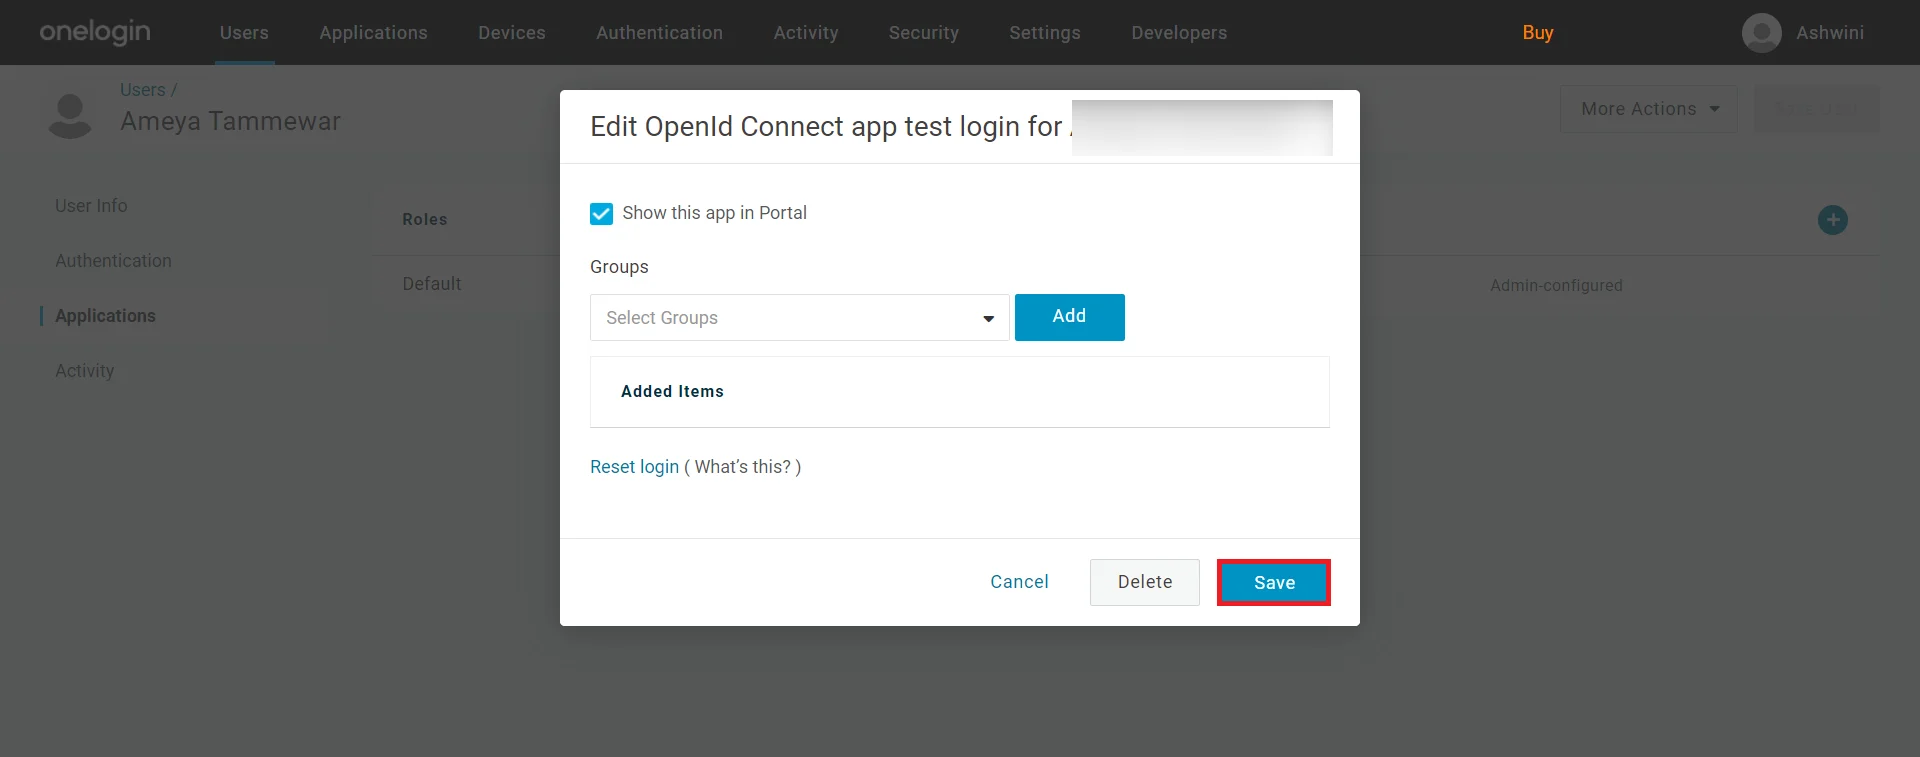 Secure Access with OneLogin Single Sign-On (SSO) Enter redirecturl Typo3 OneLogin